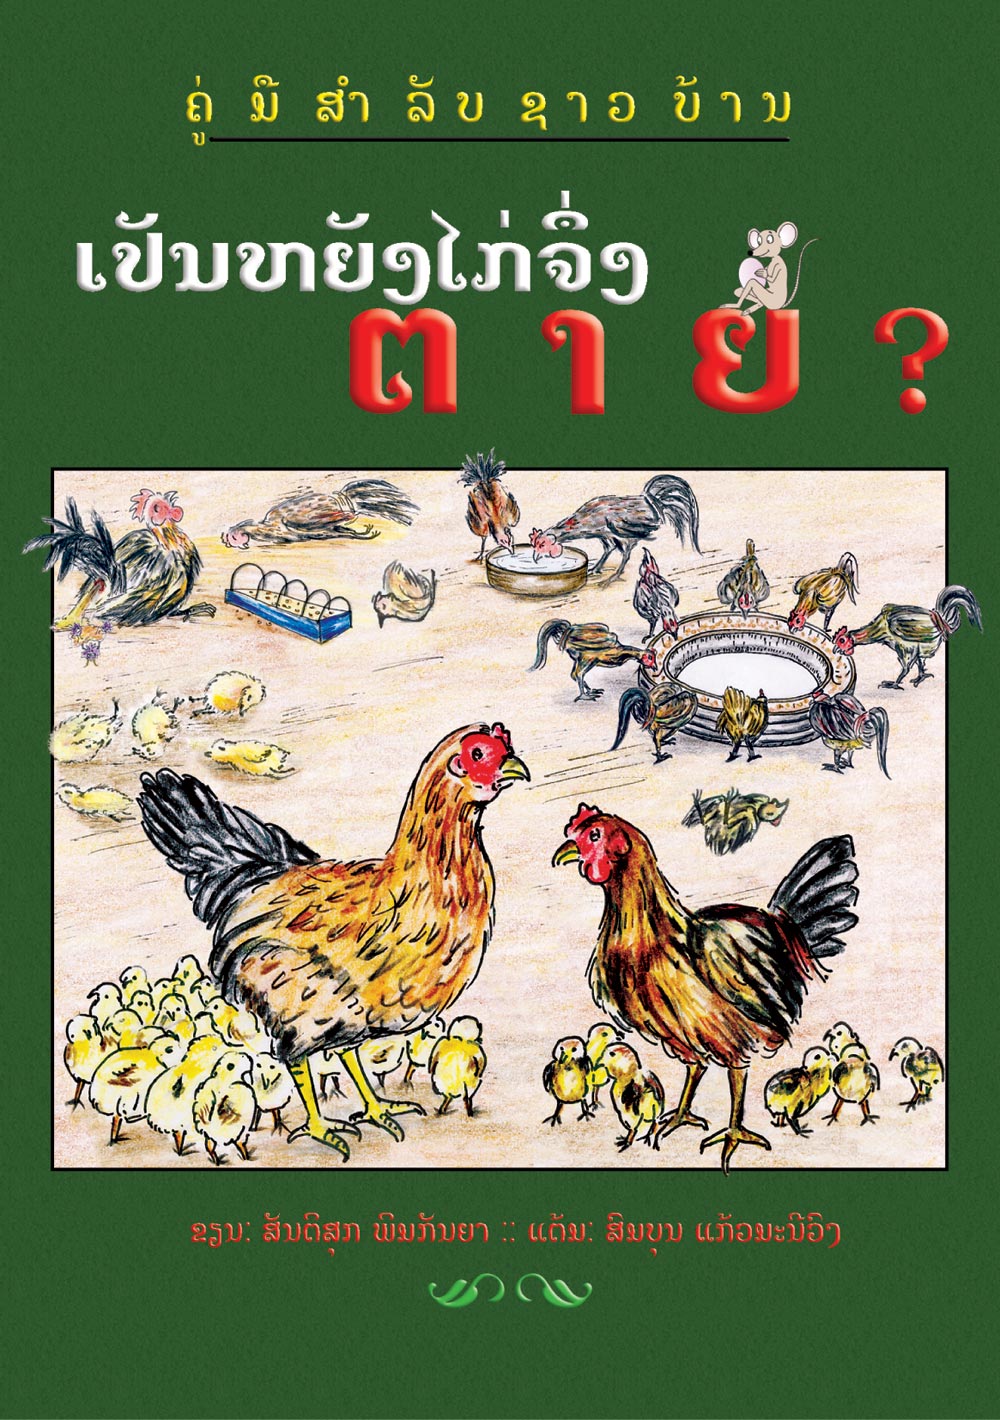 Why Do My Chickens Die? large book cover, published in Lao language